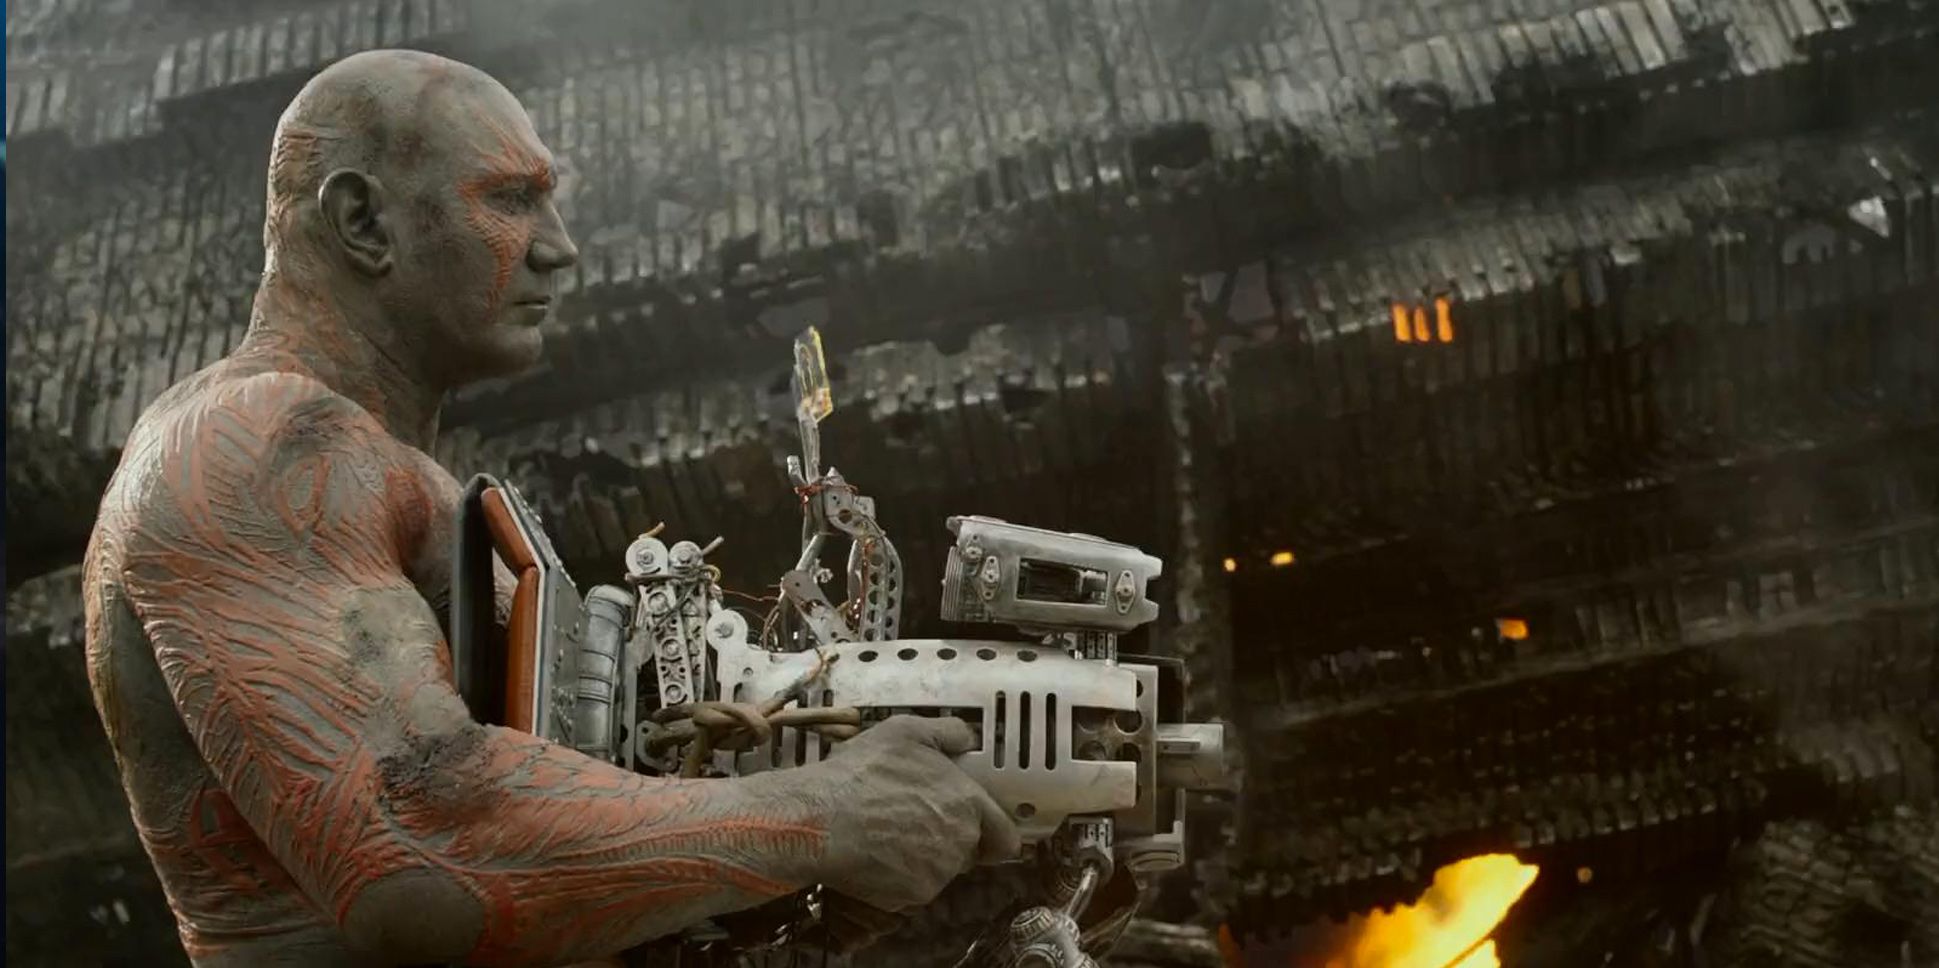 Drax with Hadron Enforcer